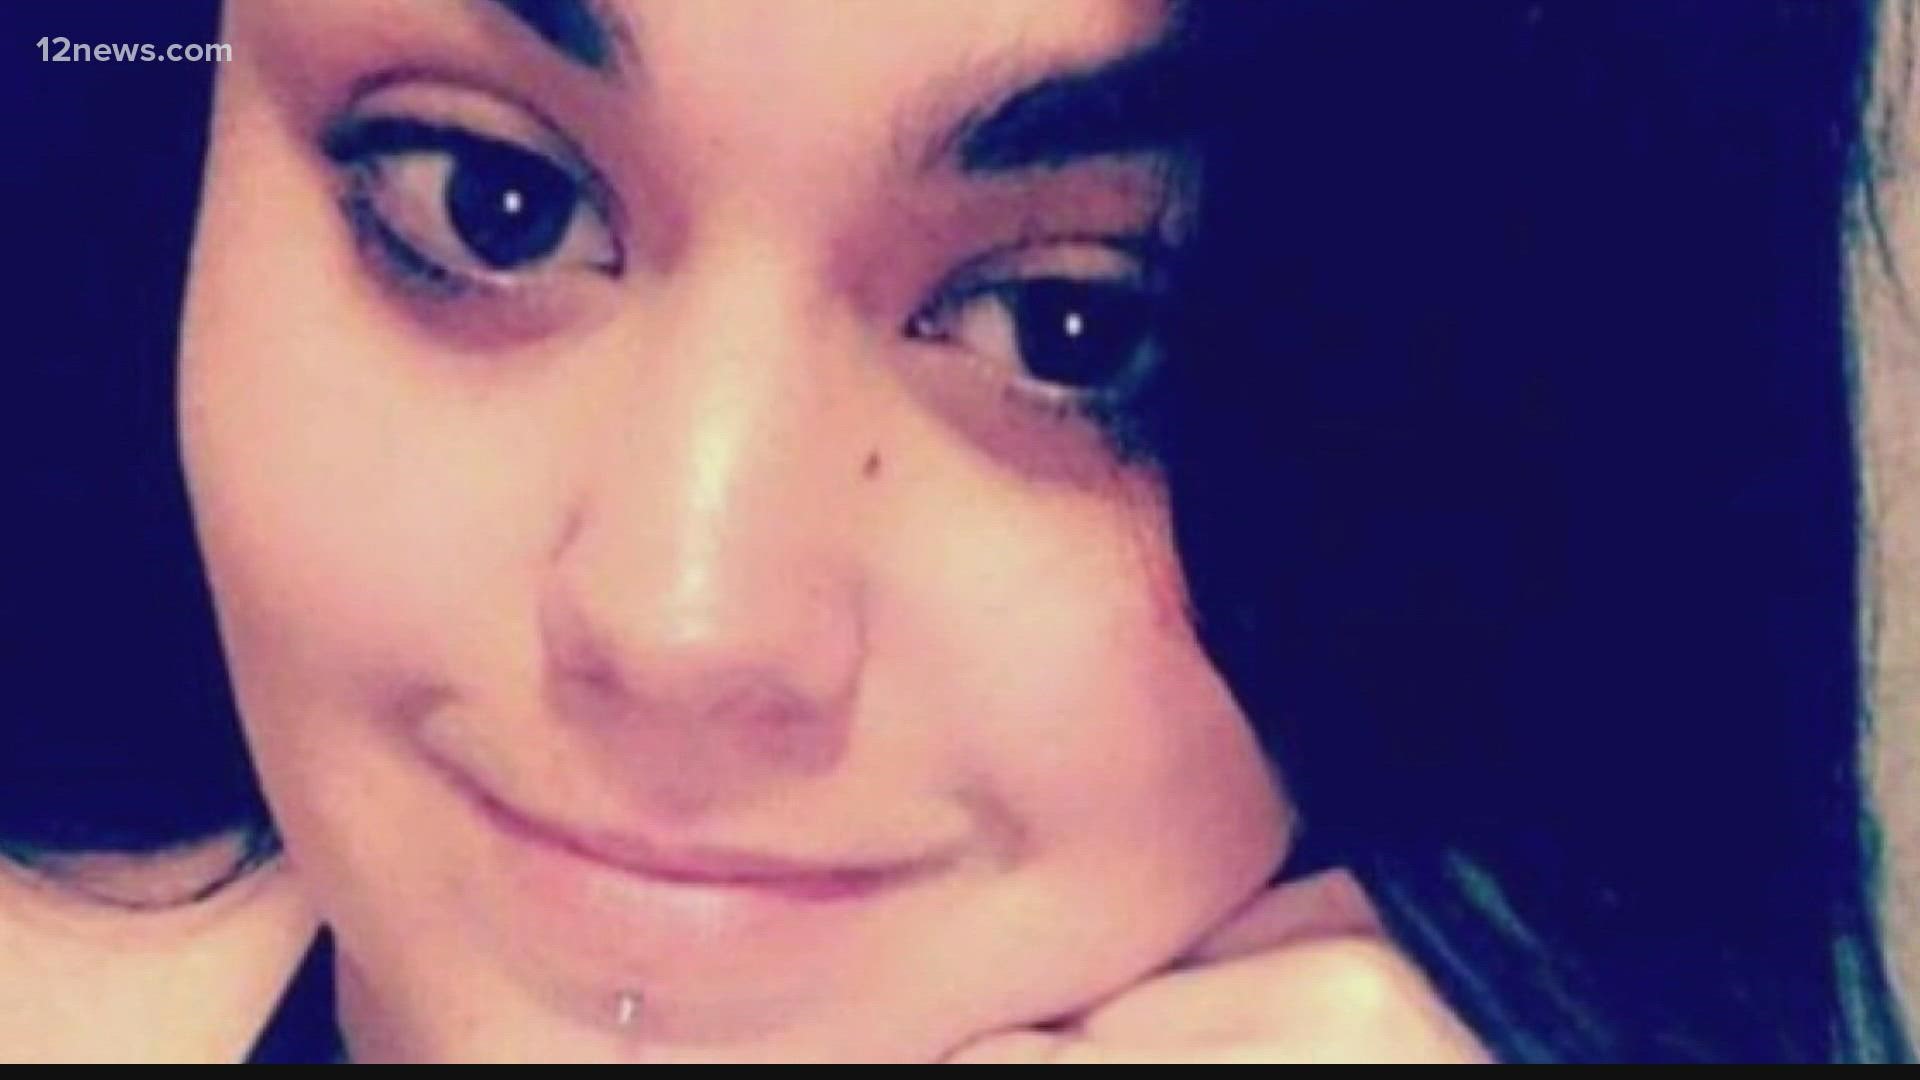 Irene Luevano's family is desperately searching for her. She went missing on Sunday after she told her family her boyfriend stabbed her in the neck.